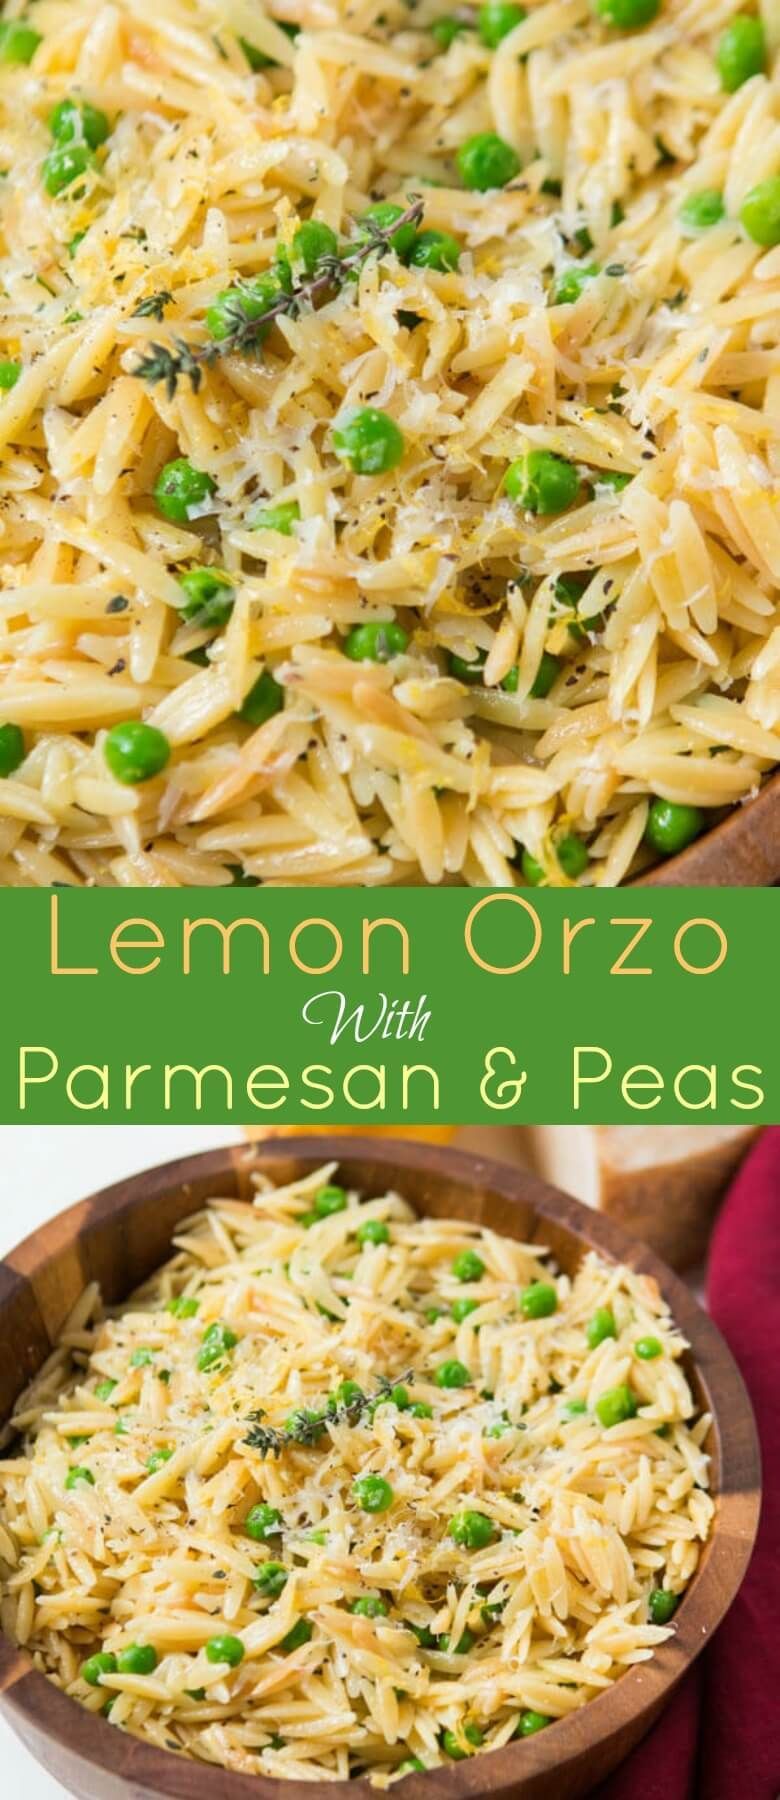 Quick and Easy Lemon Orzo with Parmesan and Peas via @ohsweetbasil